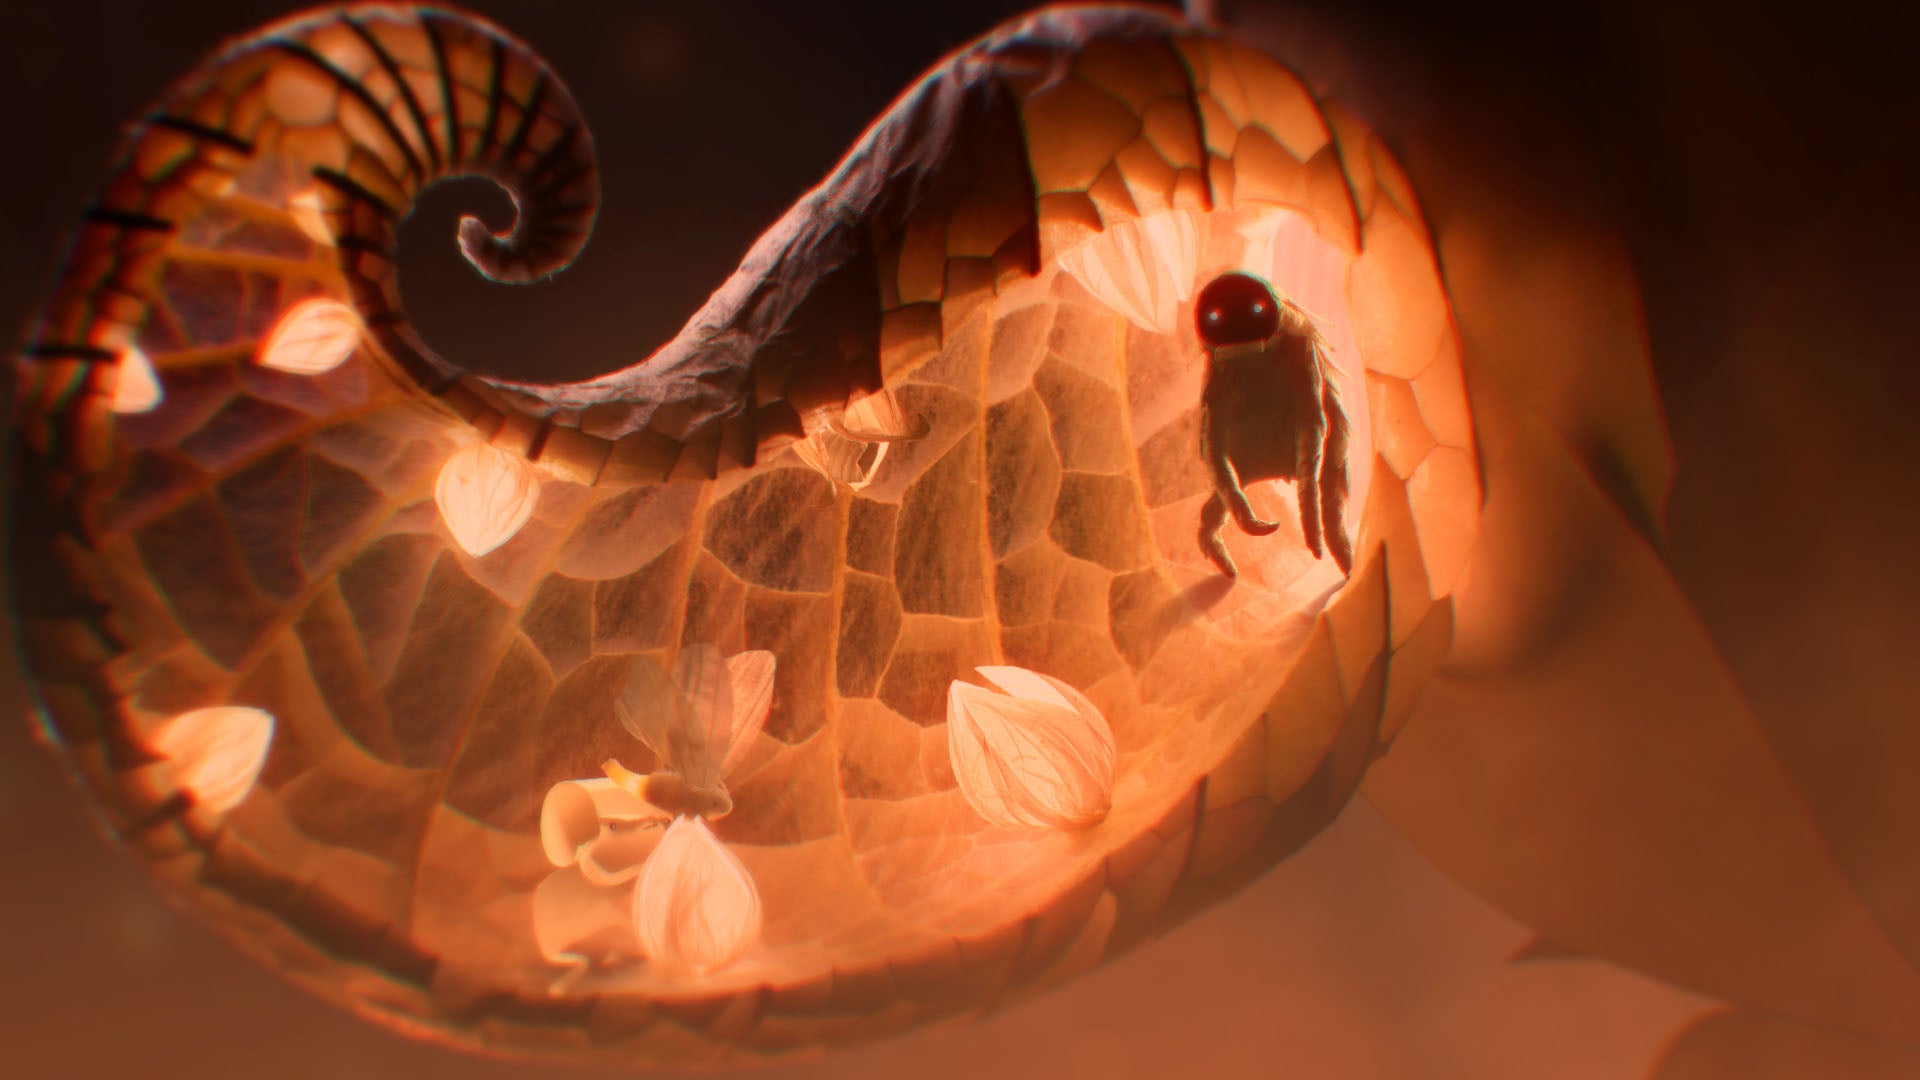 Image for Hand-crafted paper adventure Papetura has one of the most original, stunning visuals in games